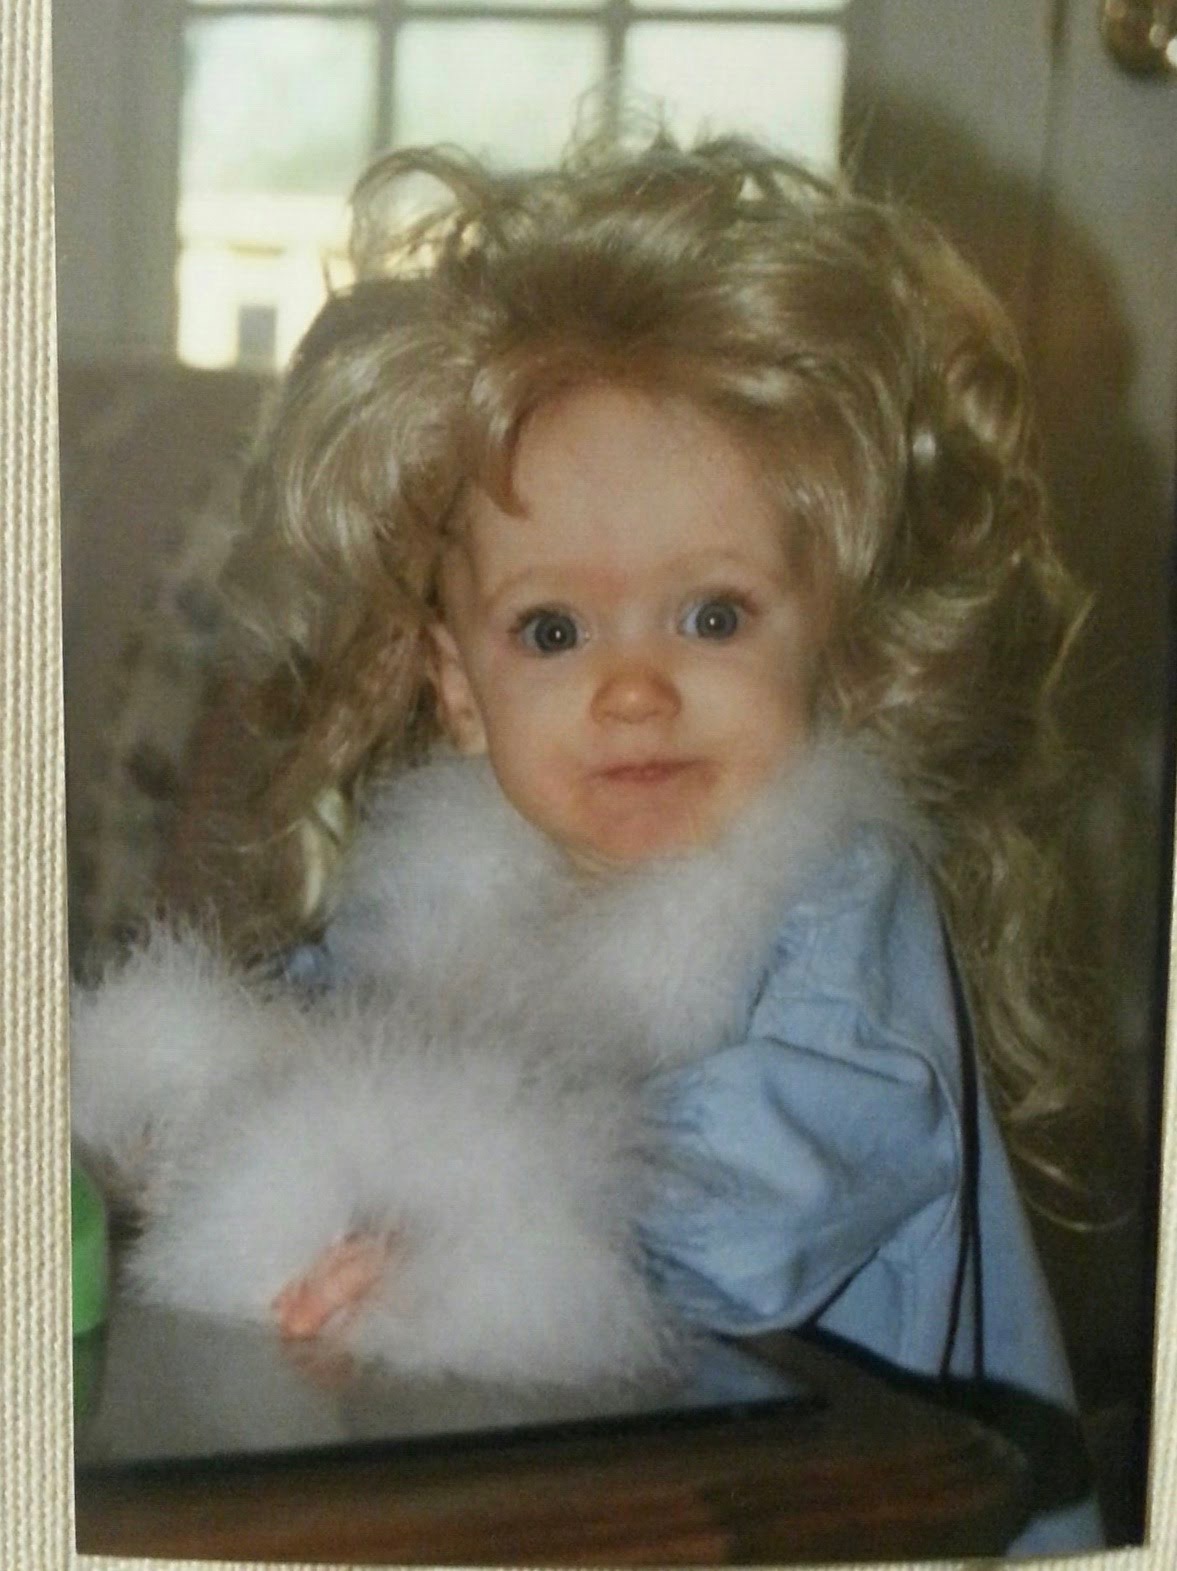 Tomlinson has always been one for performing—and "Dolly Parton" hair. (Courtesy of Brittany Tomlinson)